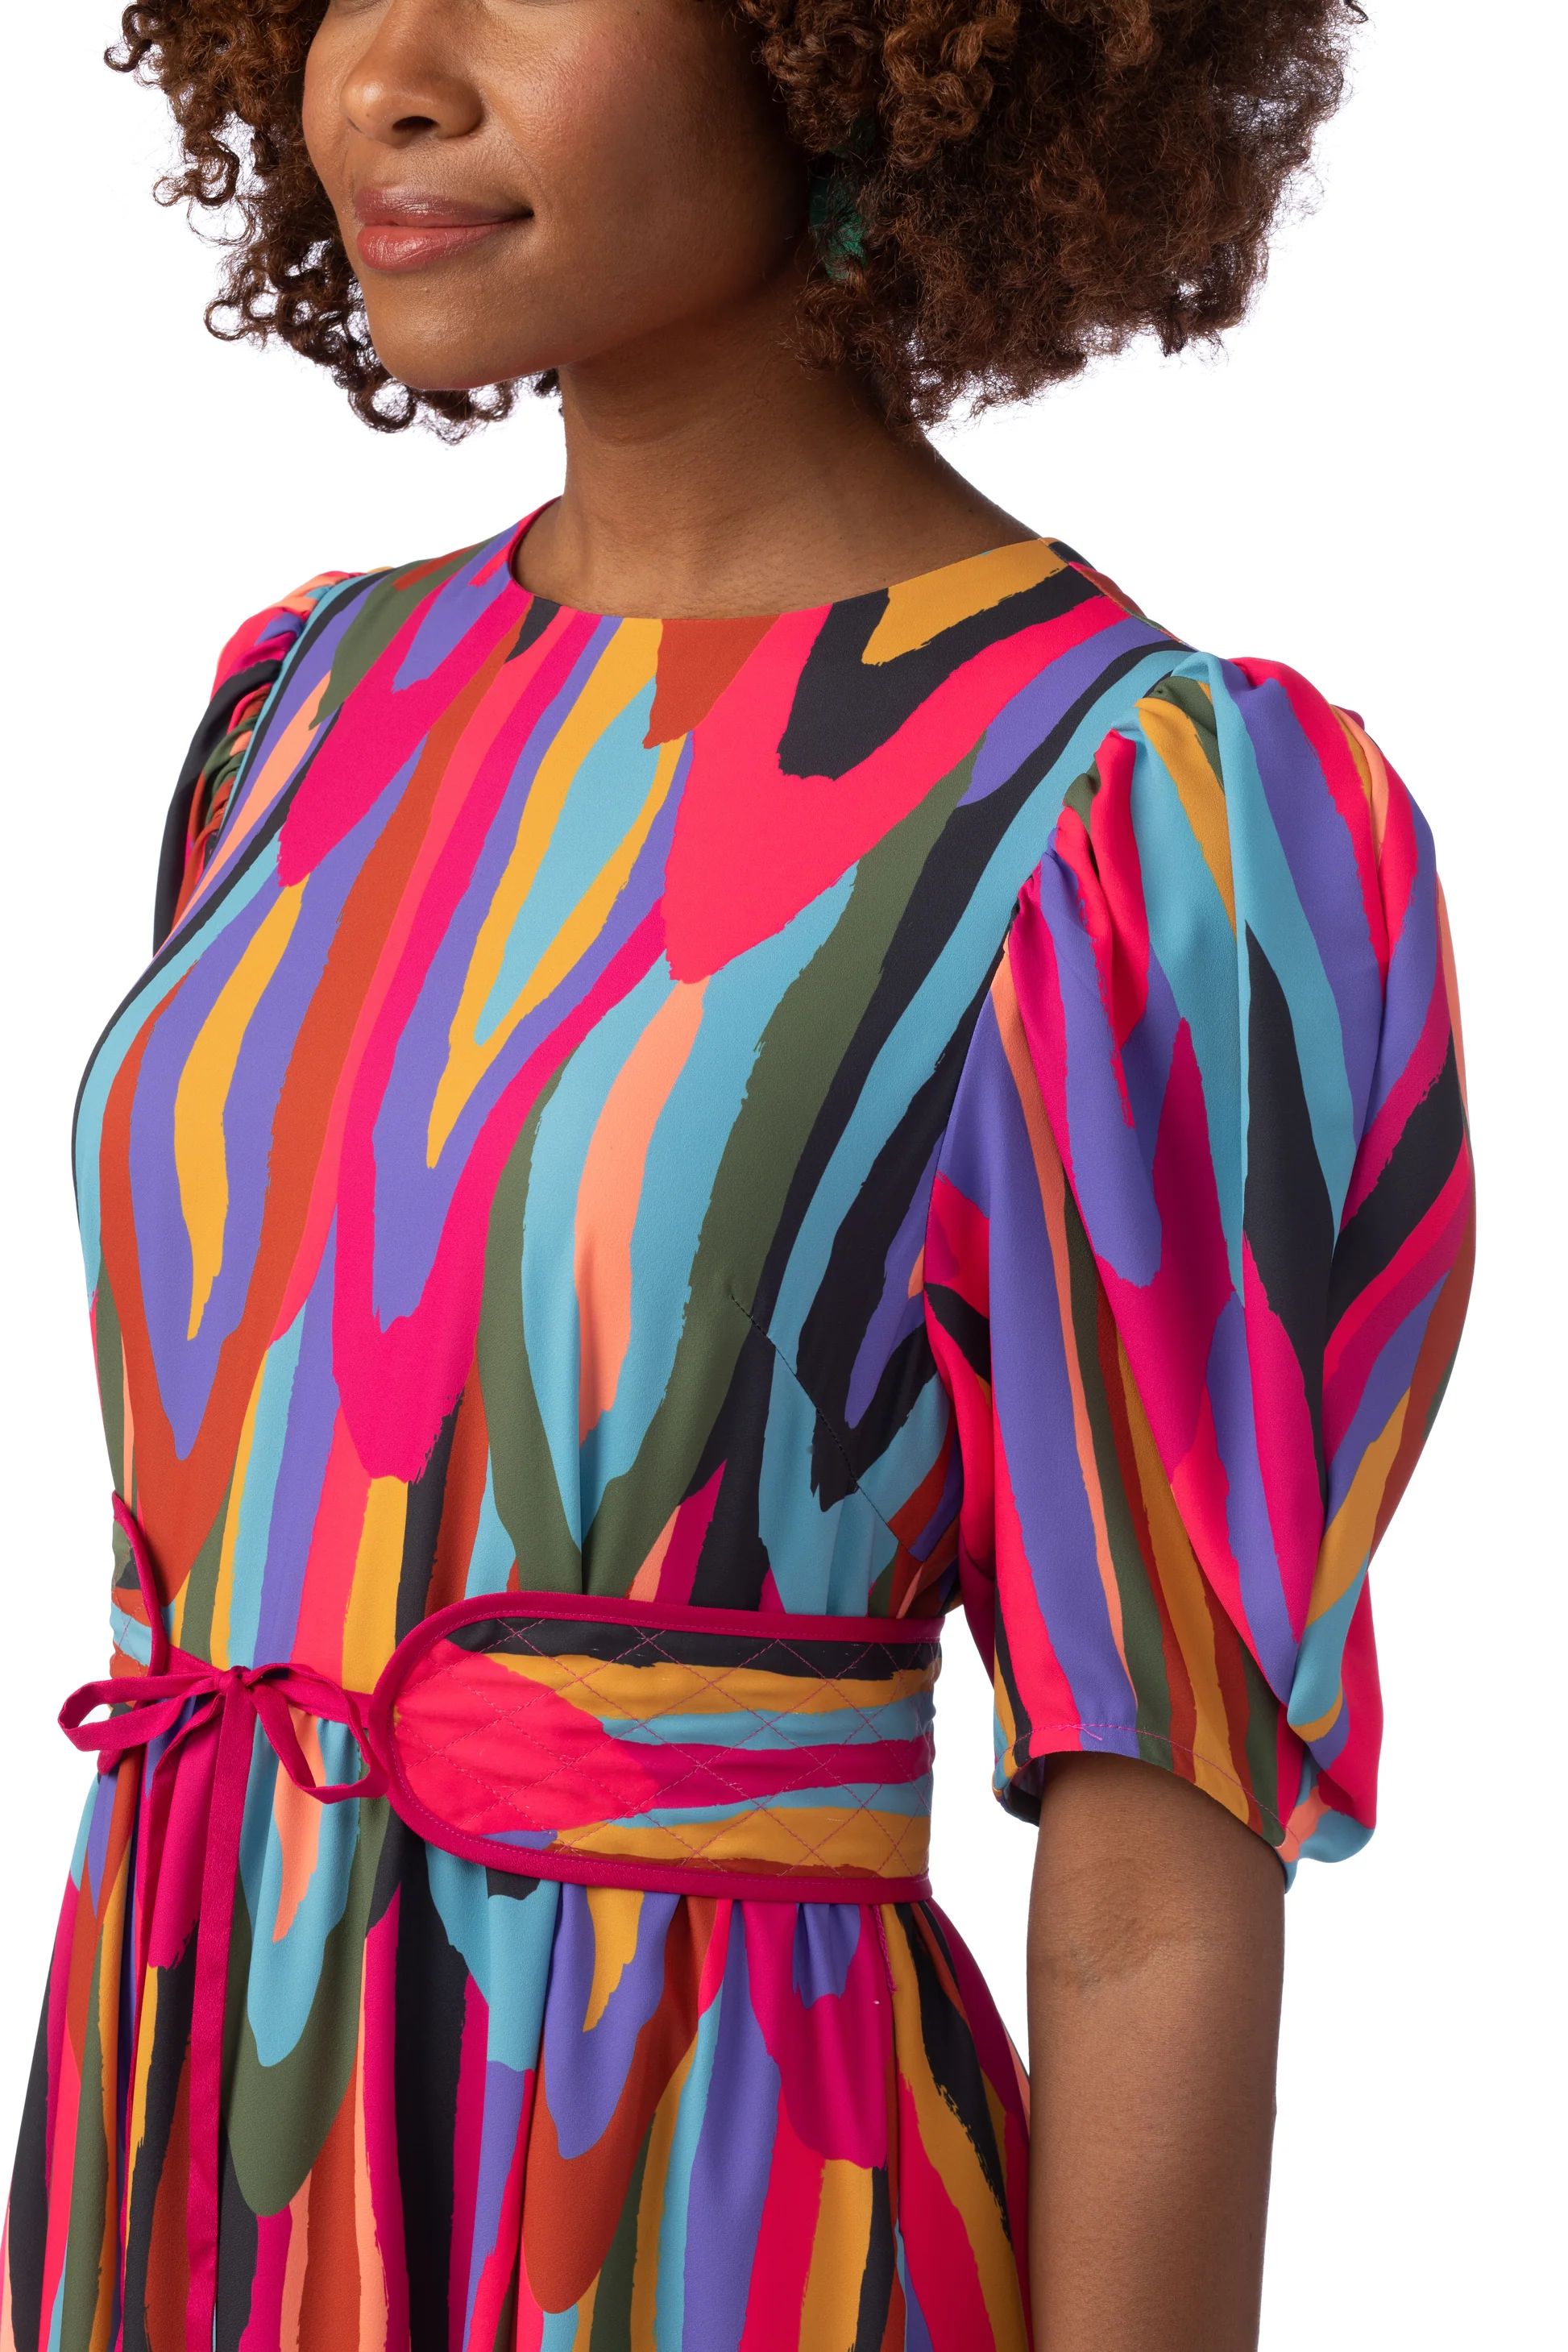 Flora Dress in Funky Town - CROSBY by Mollie Burch | CROSBY by Mollie Burch